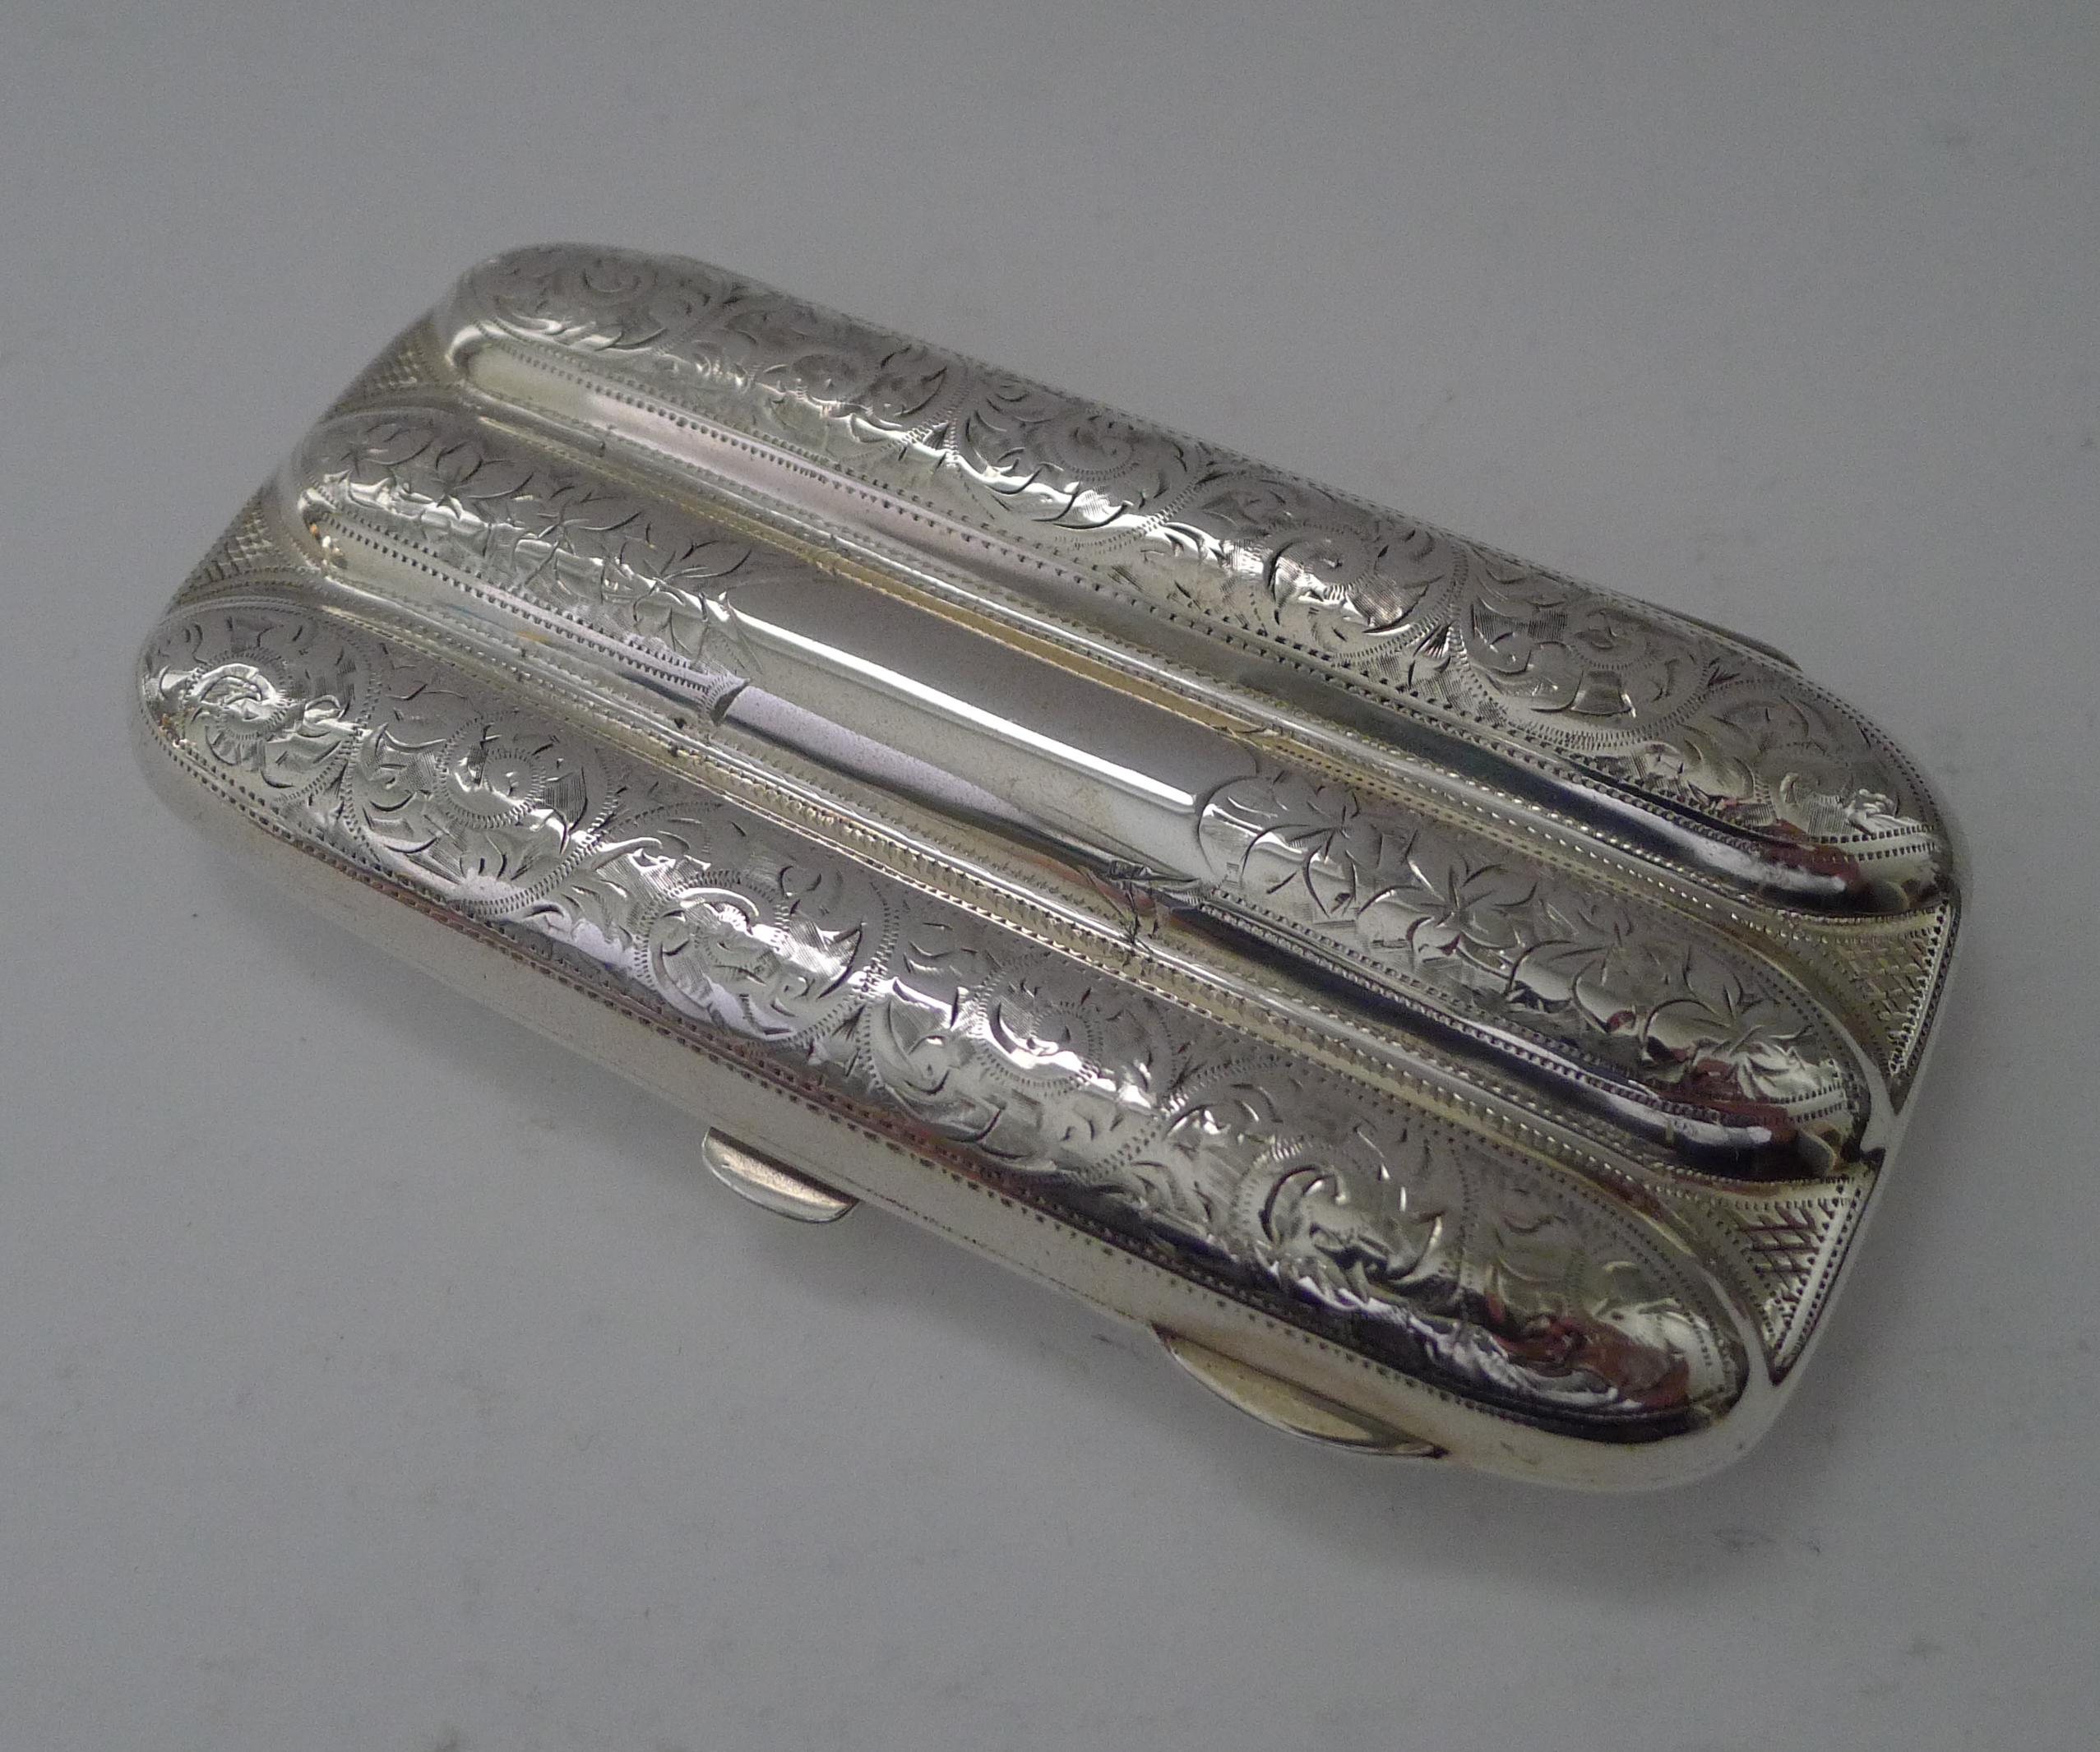 A handsome English solid sterling silver cigar case, beautifully engraved with a vacant shield-shaped cartouche to the front.

The hinge and clasp to the front are in perfect working order, the case snaps shut securely.

The interior reveals the